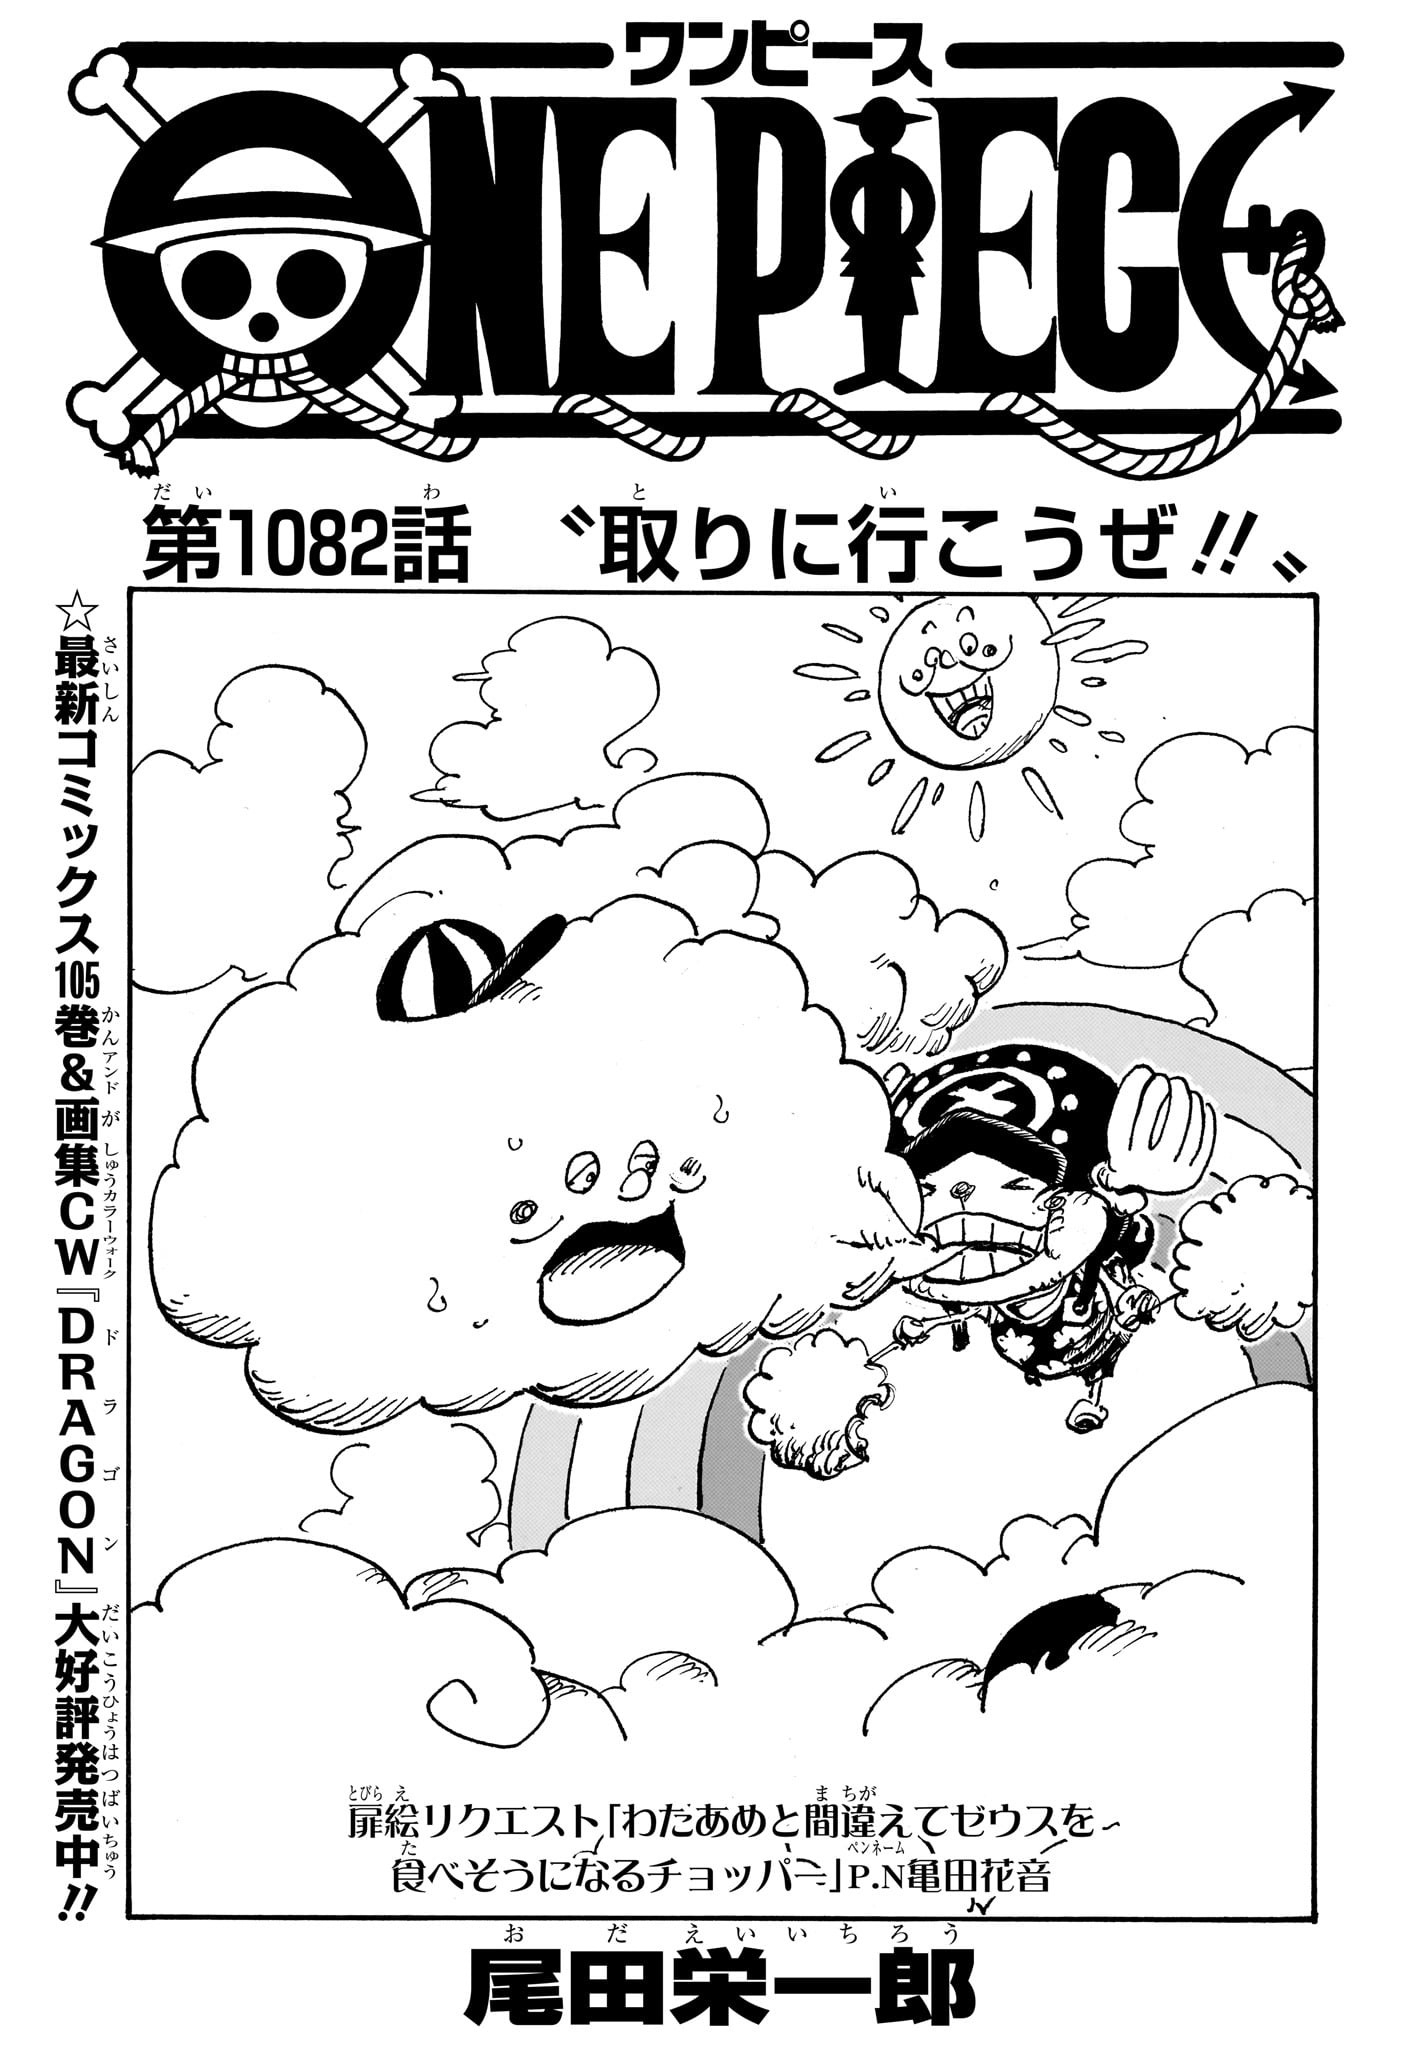 One Piece - Chapter 1082 - Page 1